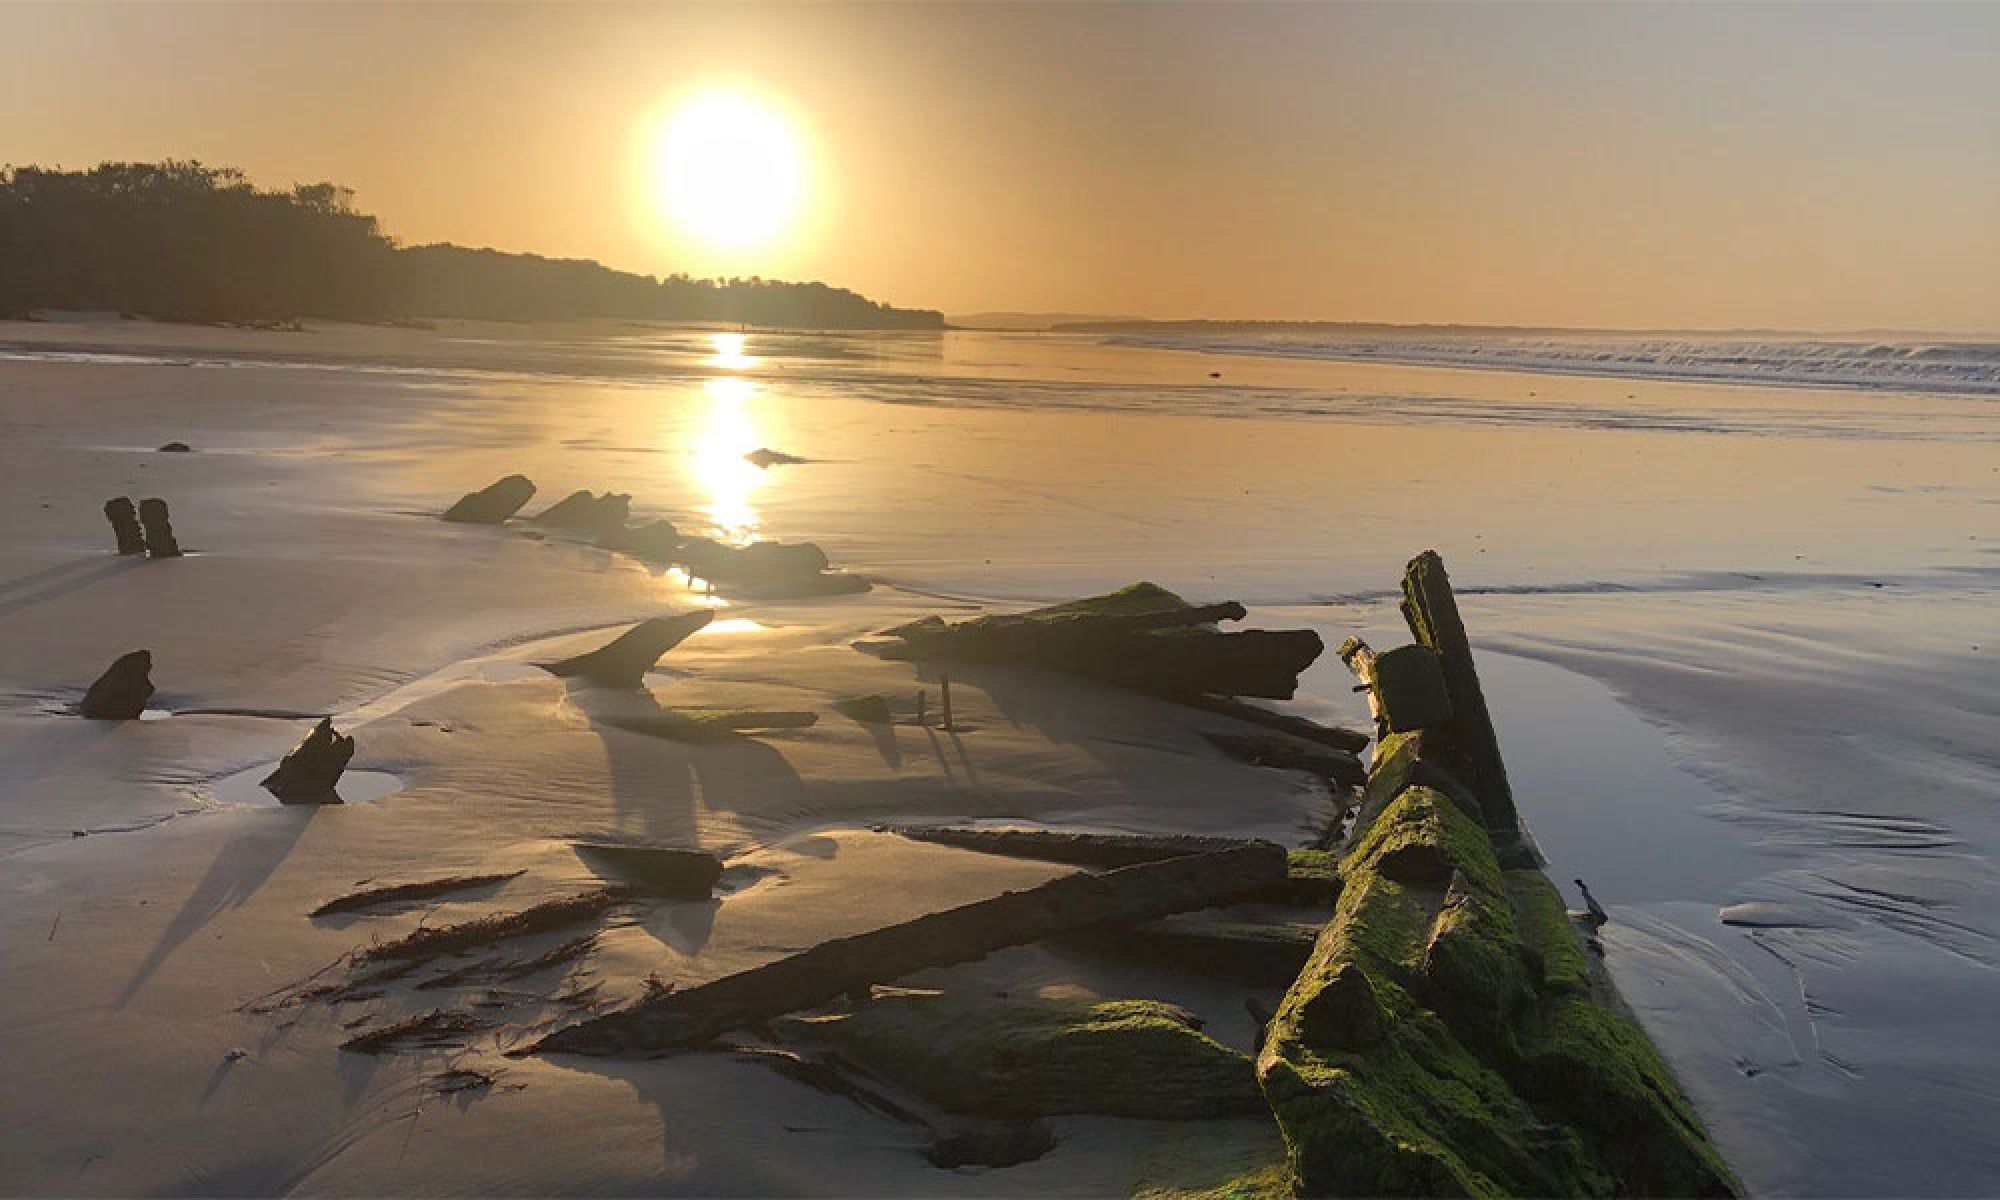 Amazon shipwreck Inverloch, washed up pieces of the ship can be seen on the beach, the wood from the ship is growing moss, The sunset can be seen behind pieces of the ship with gentle waves washing upon the sea shore. 